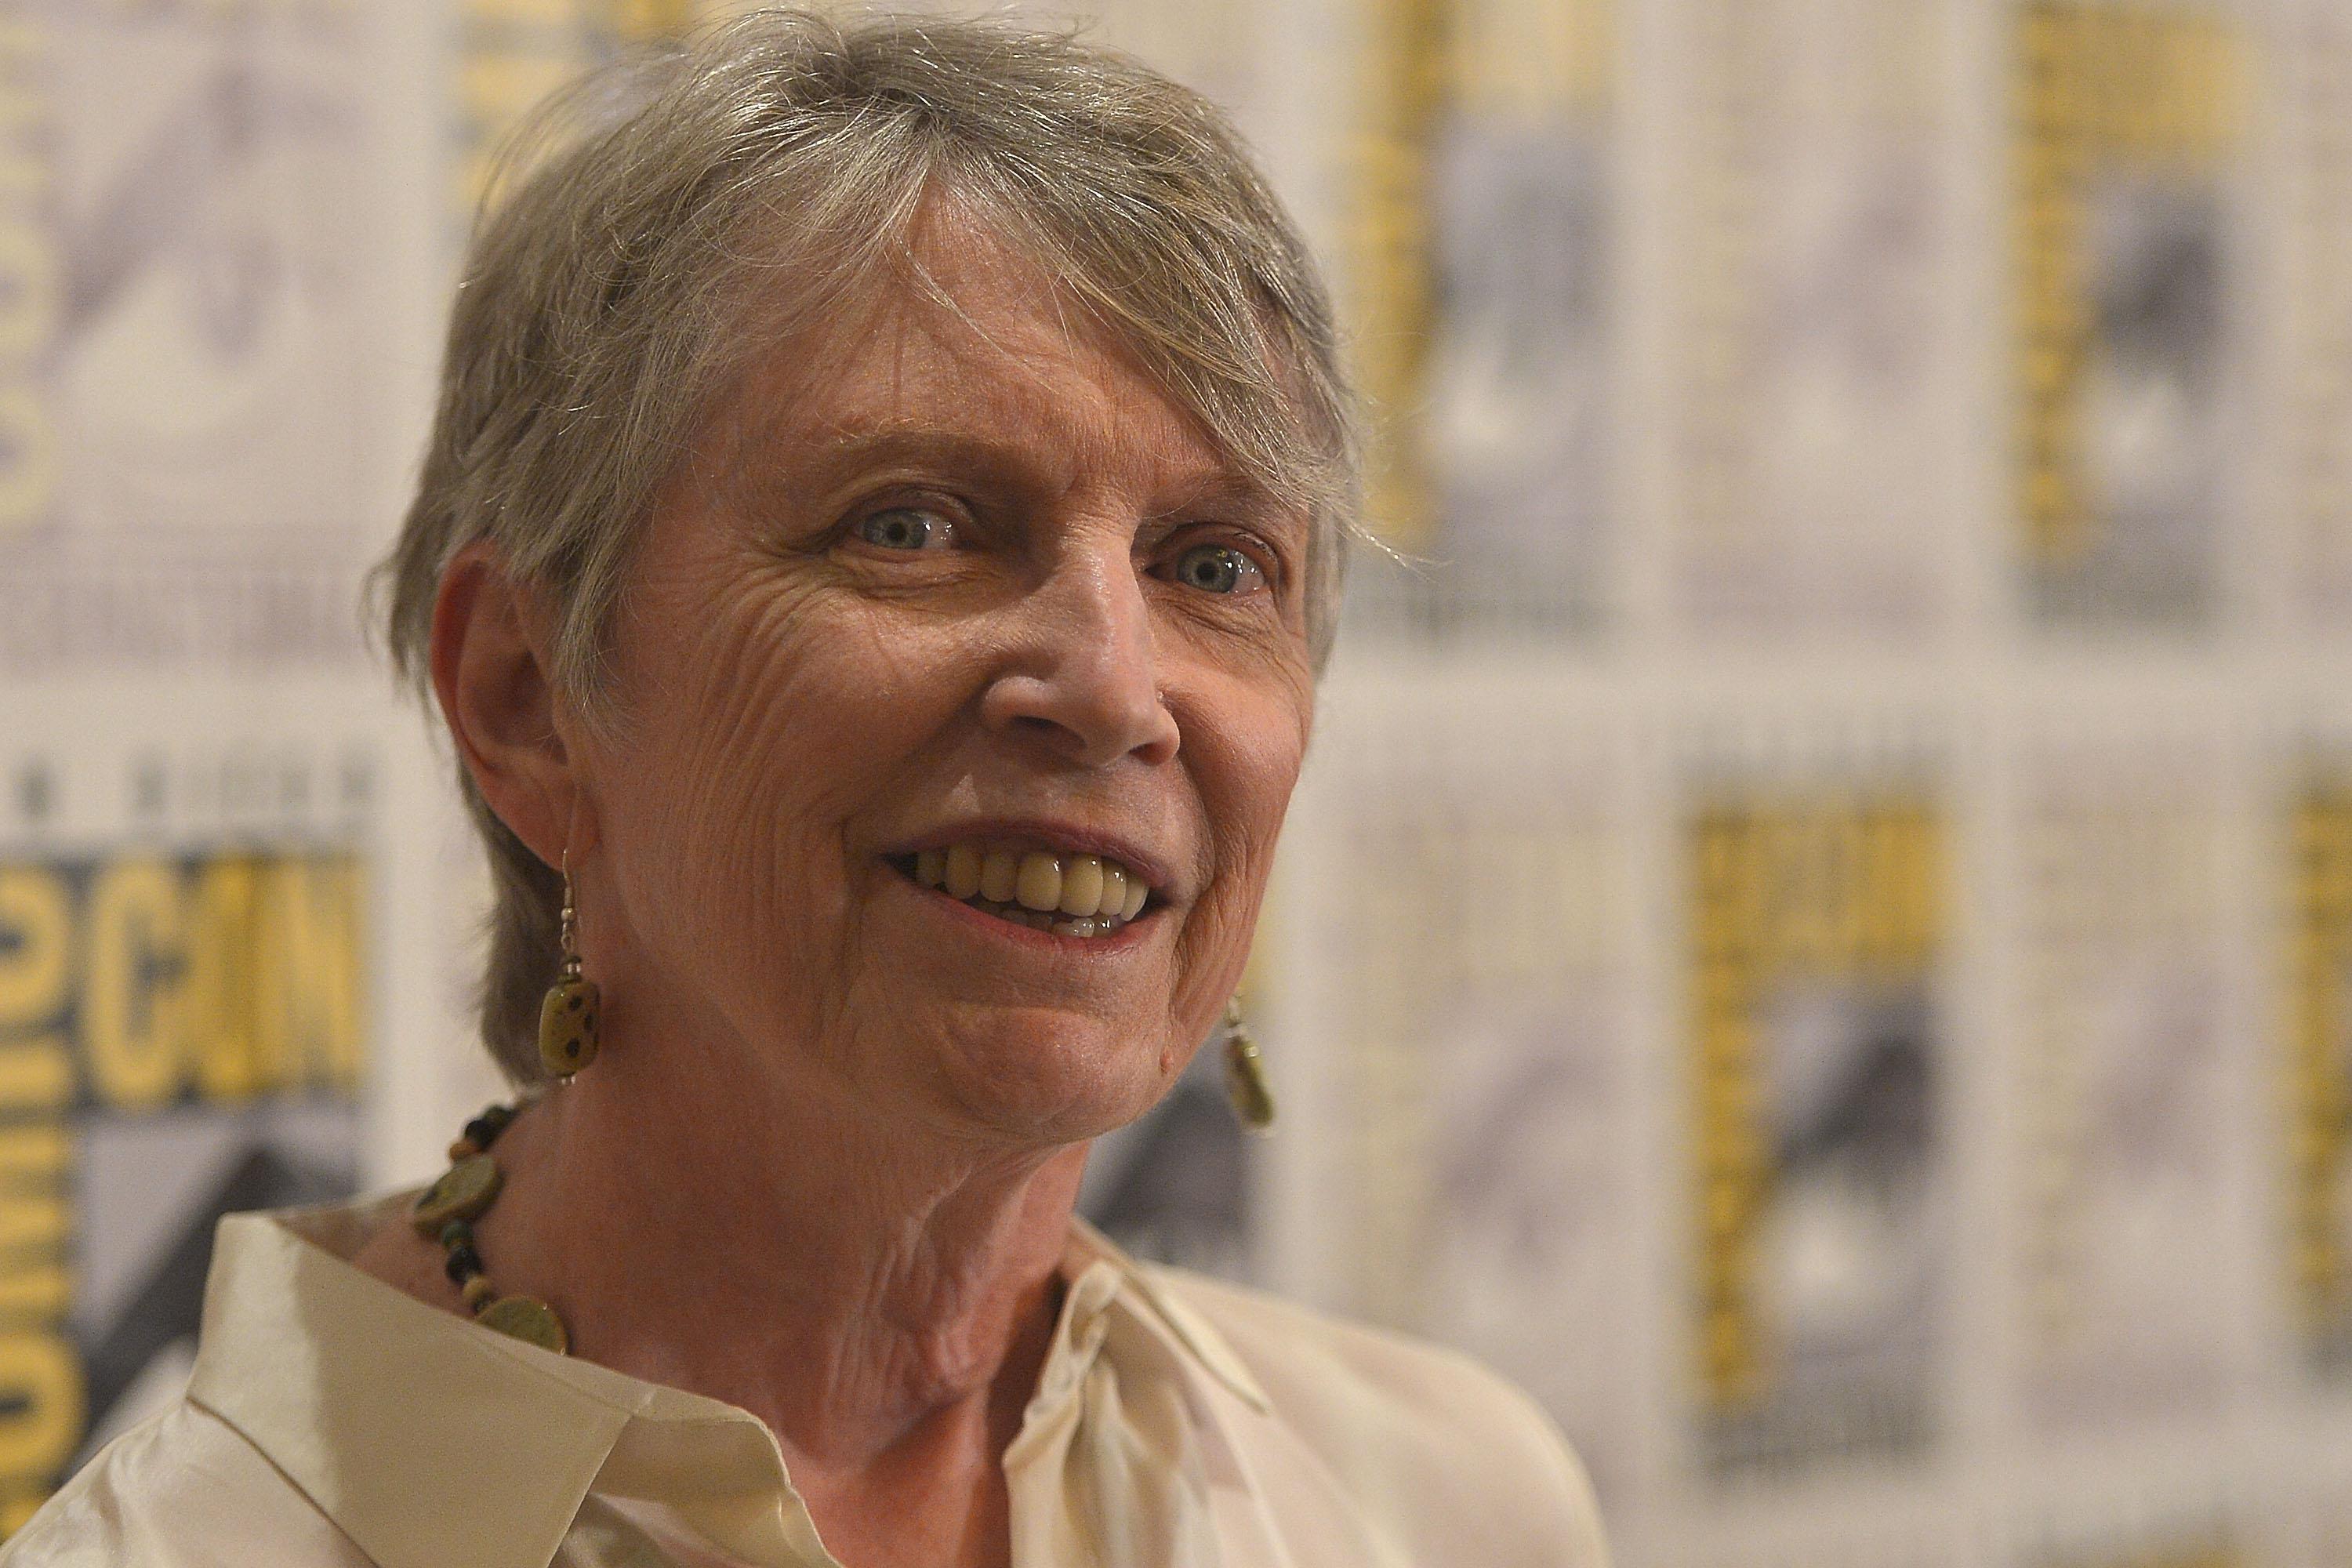 about the author lois lowry